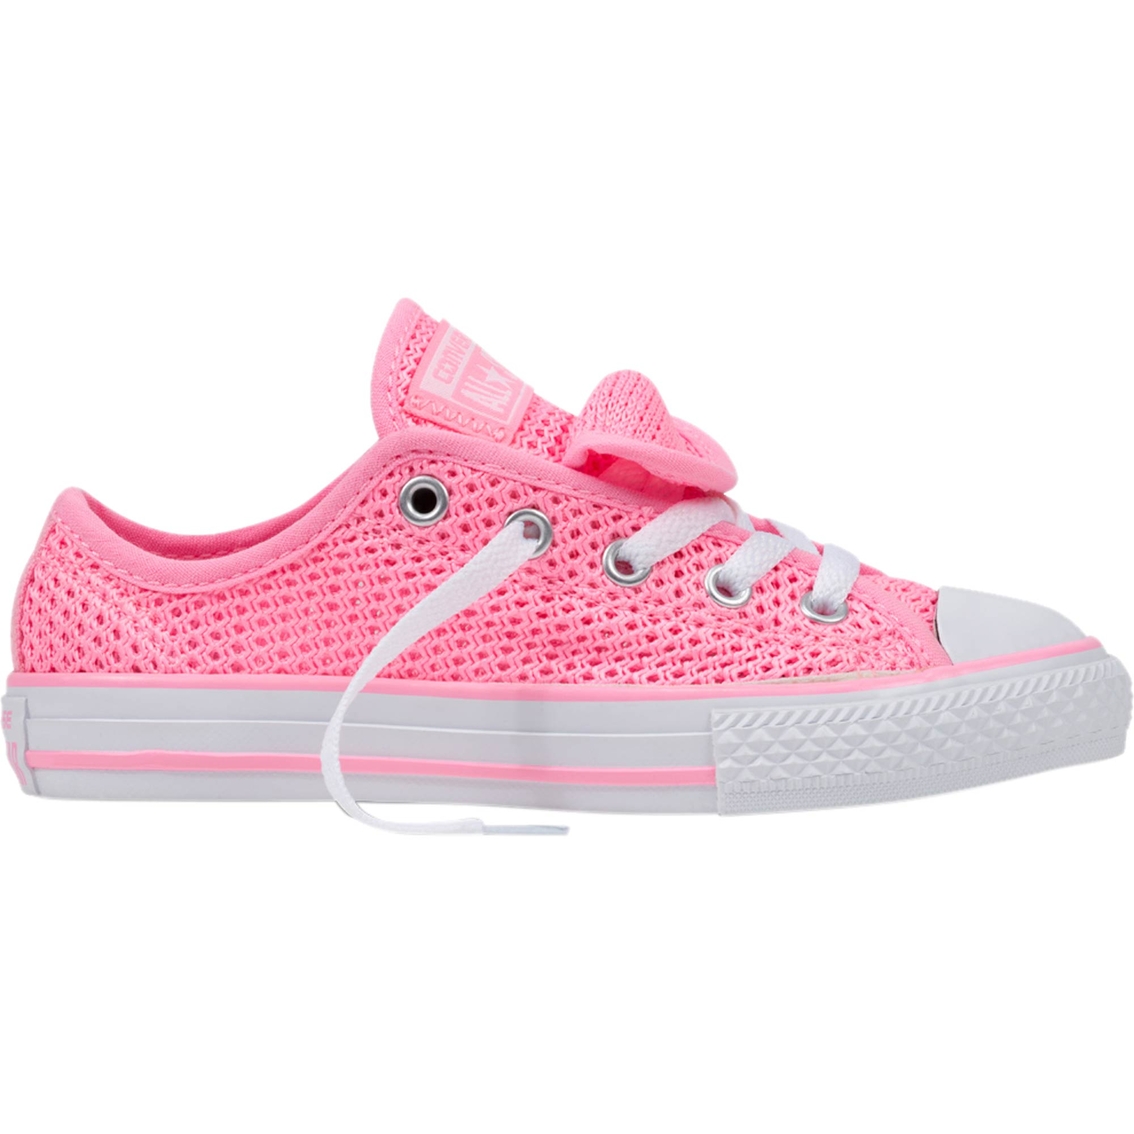 converse double tongue ox flower